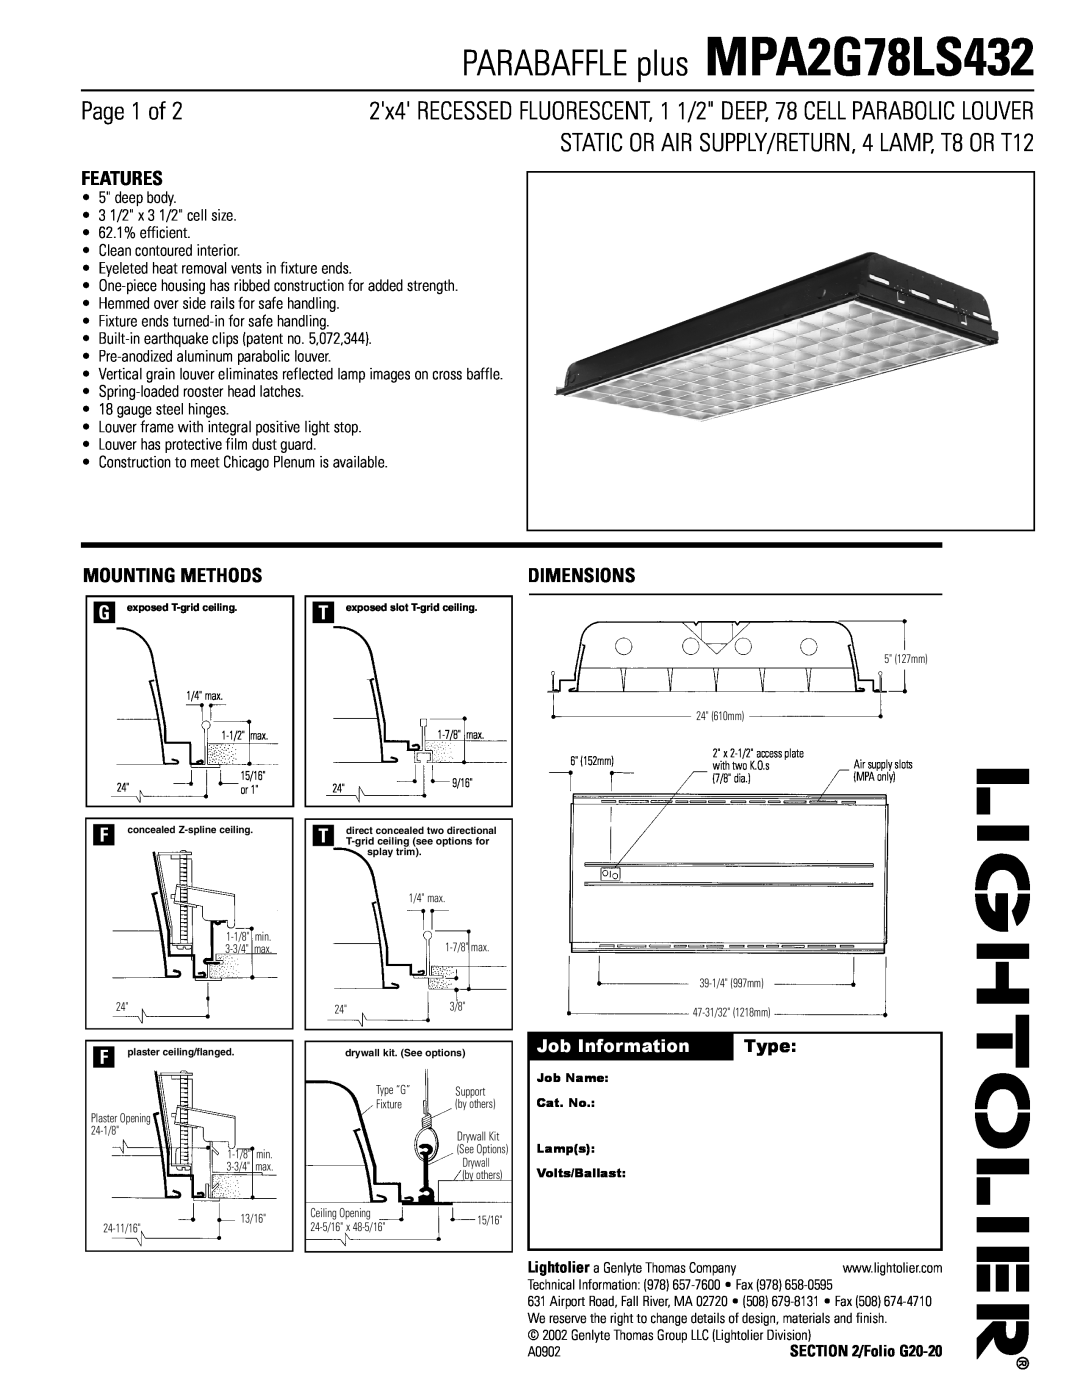 Lightolier MPA2G78LS432 dimensions Page 1 of, STATIC OR AIR SUPPLY/RETURN, 4 LAMP, T8 OR T12, Features, Mounting Methods 